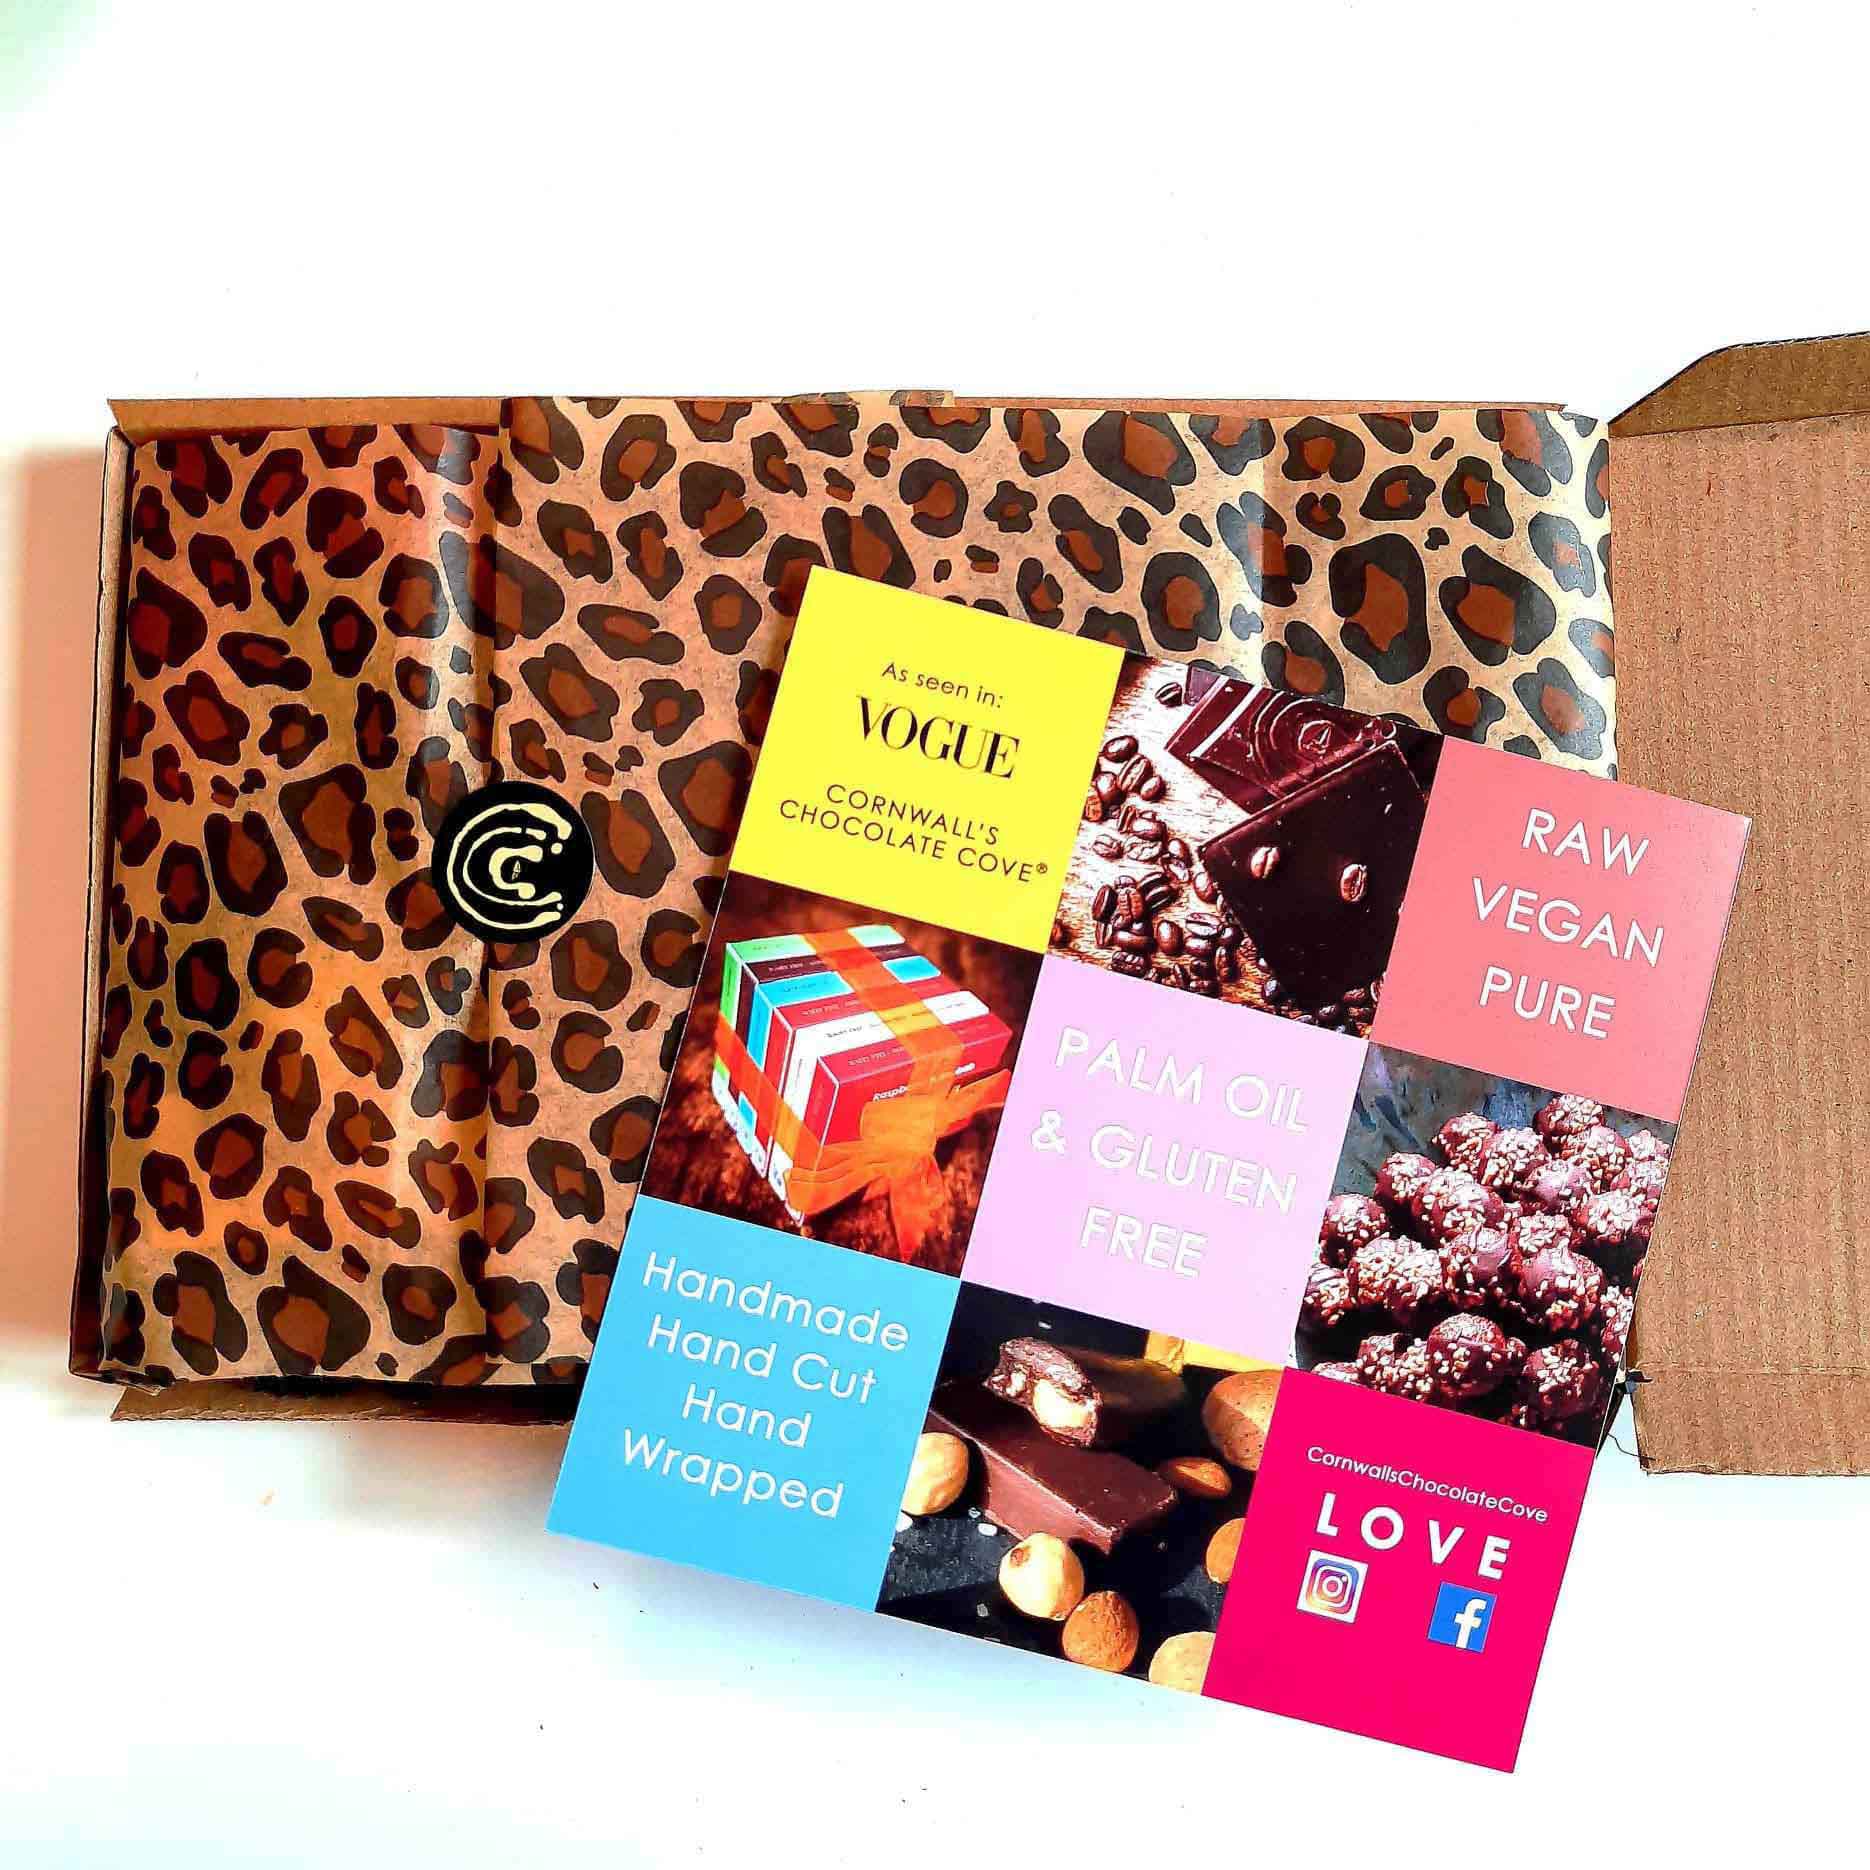 Cornwall's Chocolate Cove plant based, soya, palm oil, cane sugar and gluten free organic raw chocolate. A selection of chocolatey treats as a subscription box each month.